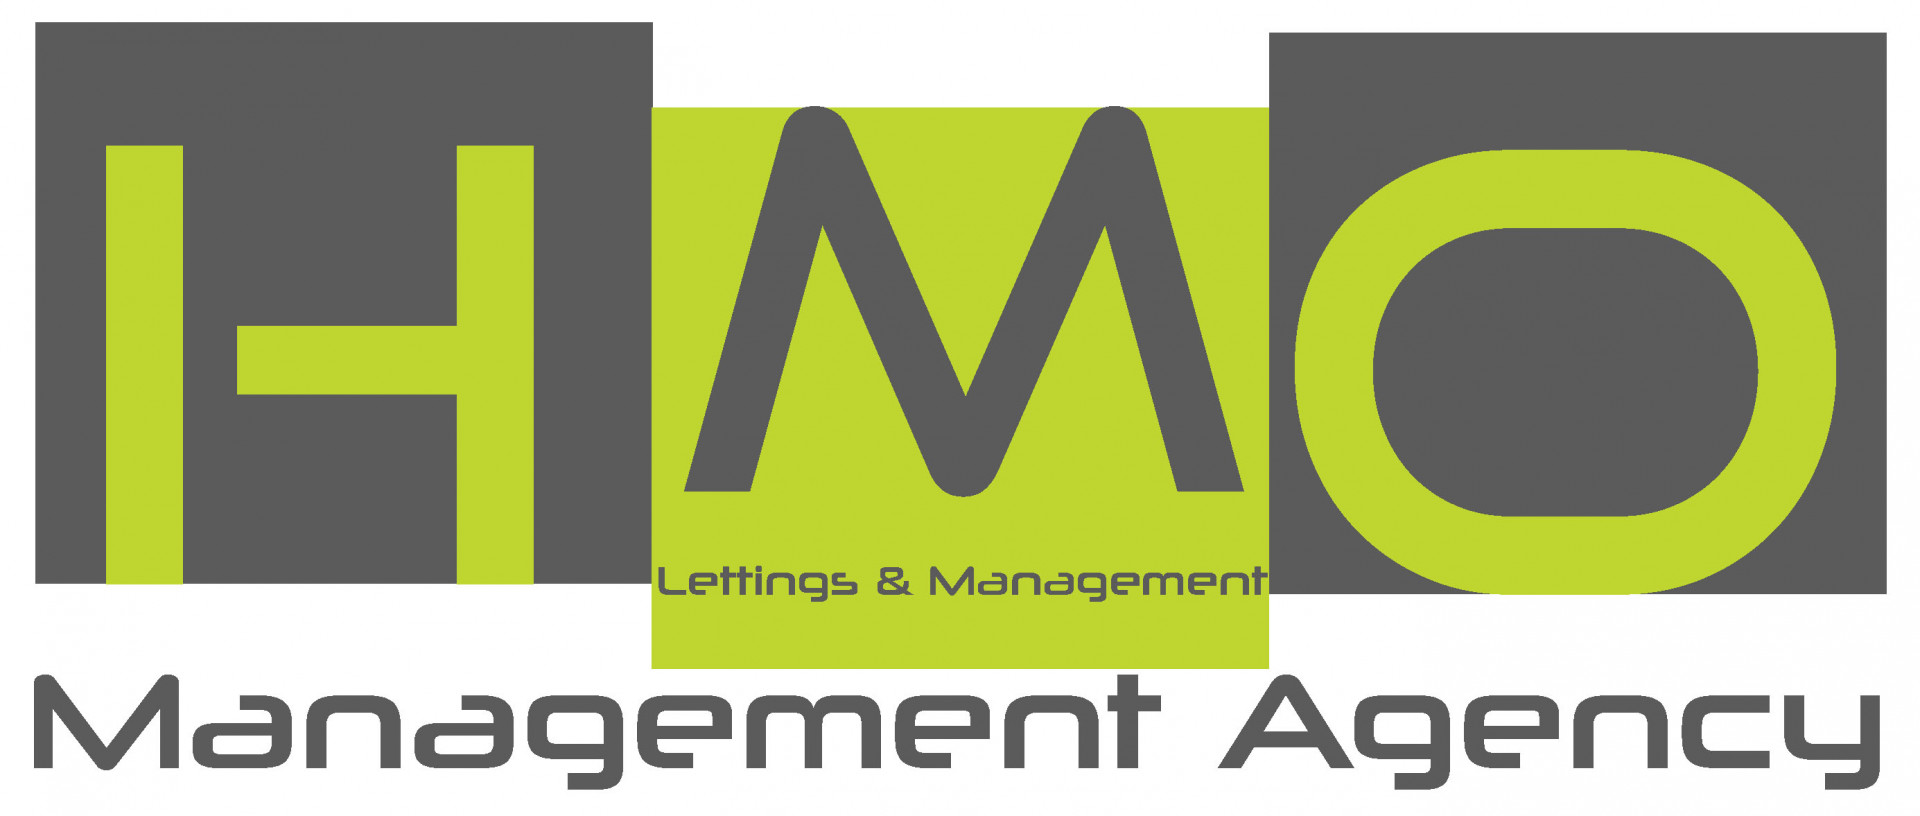 HMO Management Agency